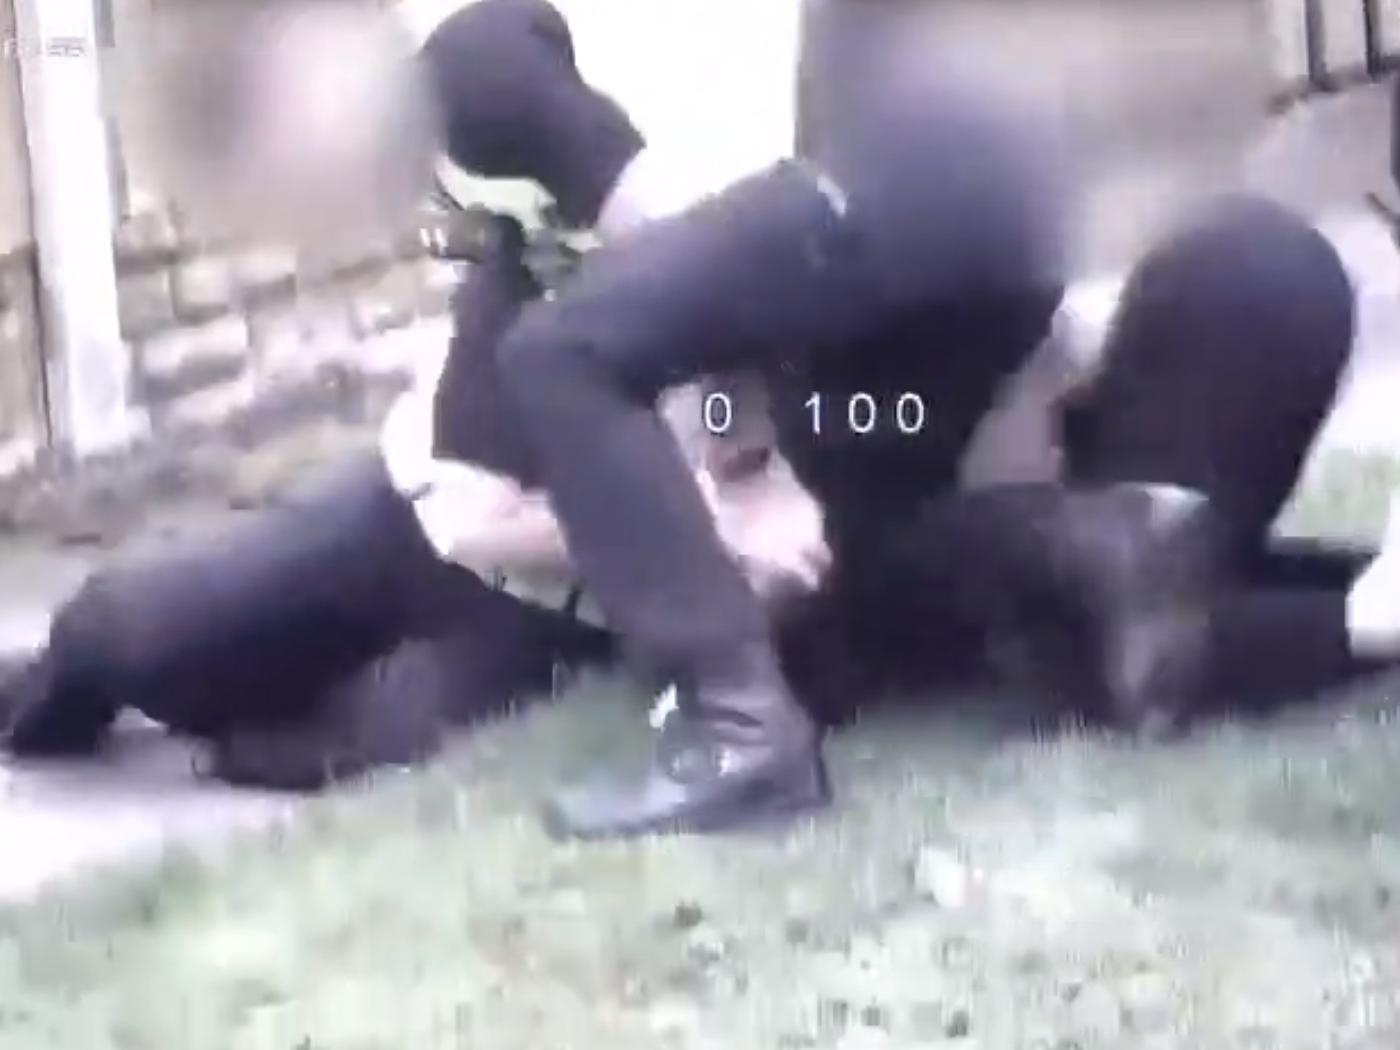 CCTV shows three officers restraining David as he was arrested for obstructing an officer - one of the officers appears to sit on him as he is restrained